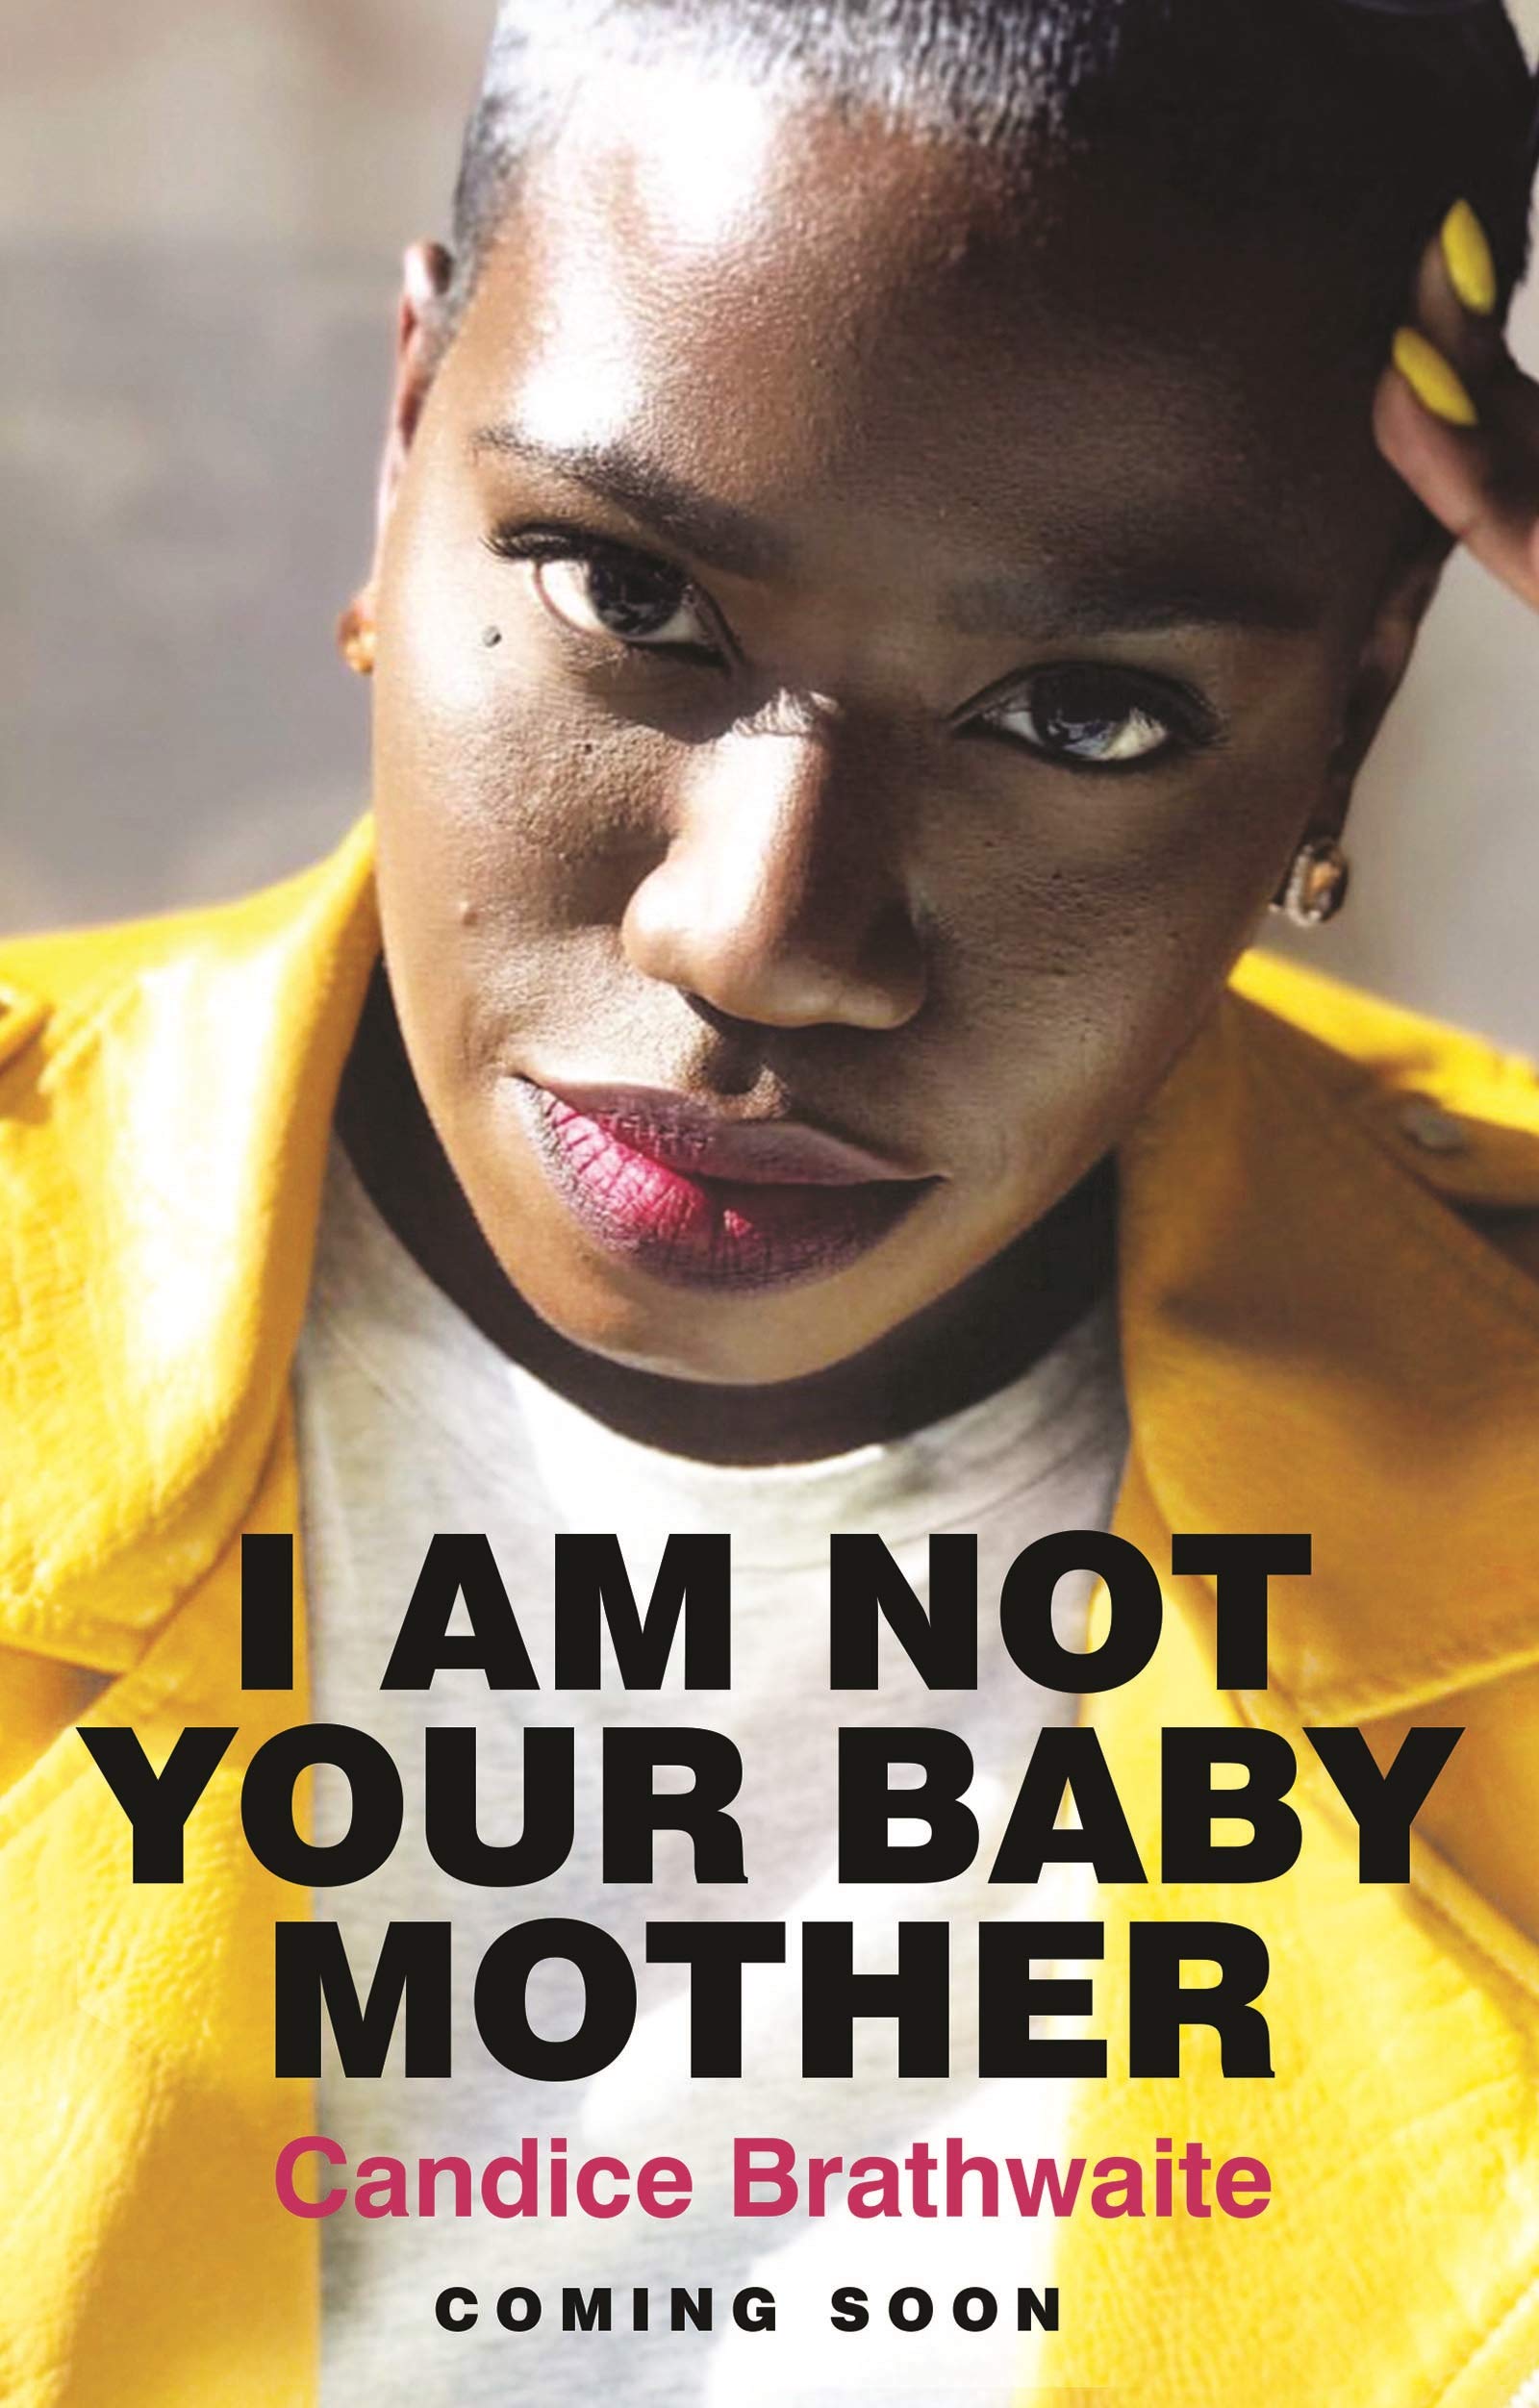 When Is I am Not your Baby Mother By Candice Brathwaite Out? Book Release Dates